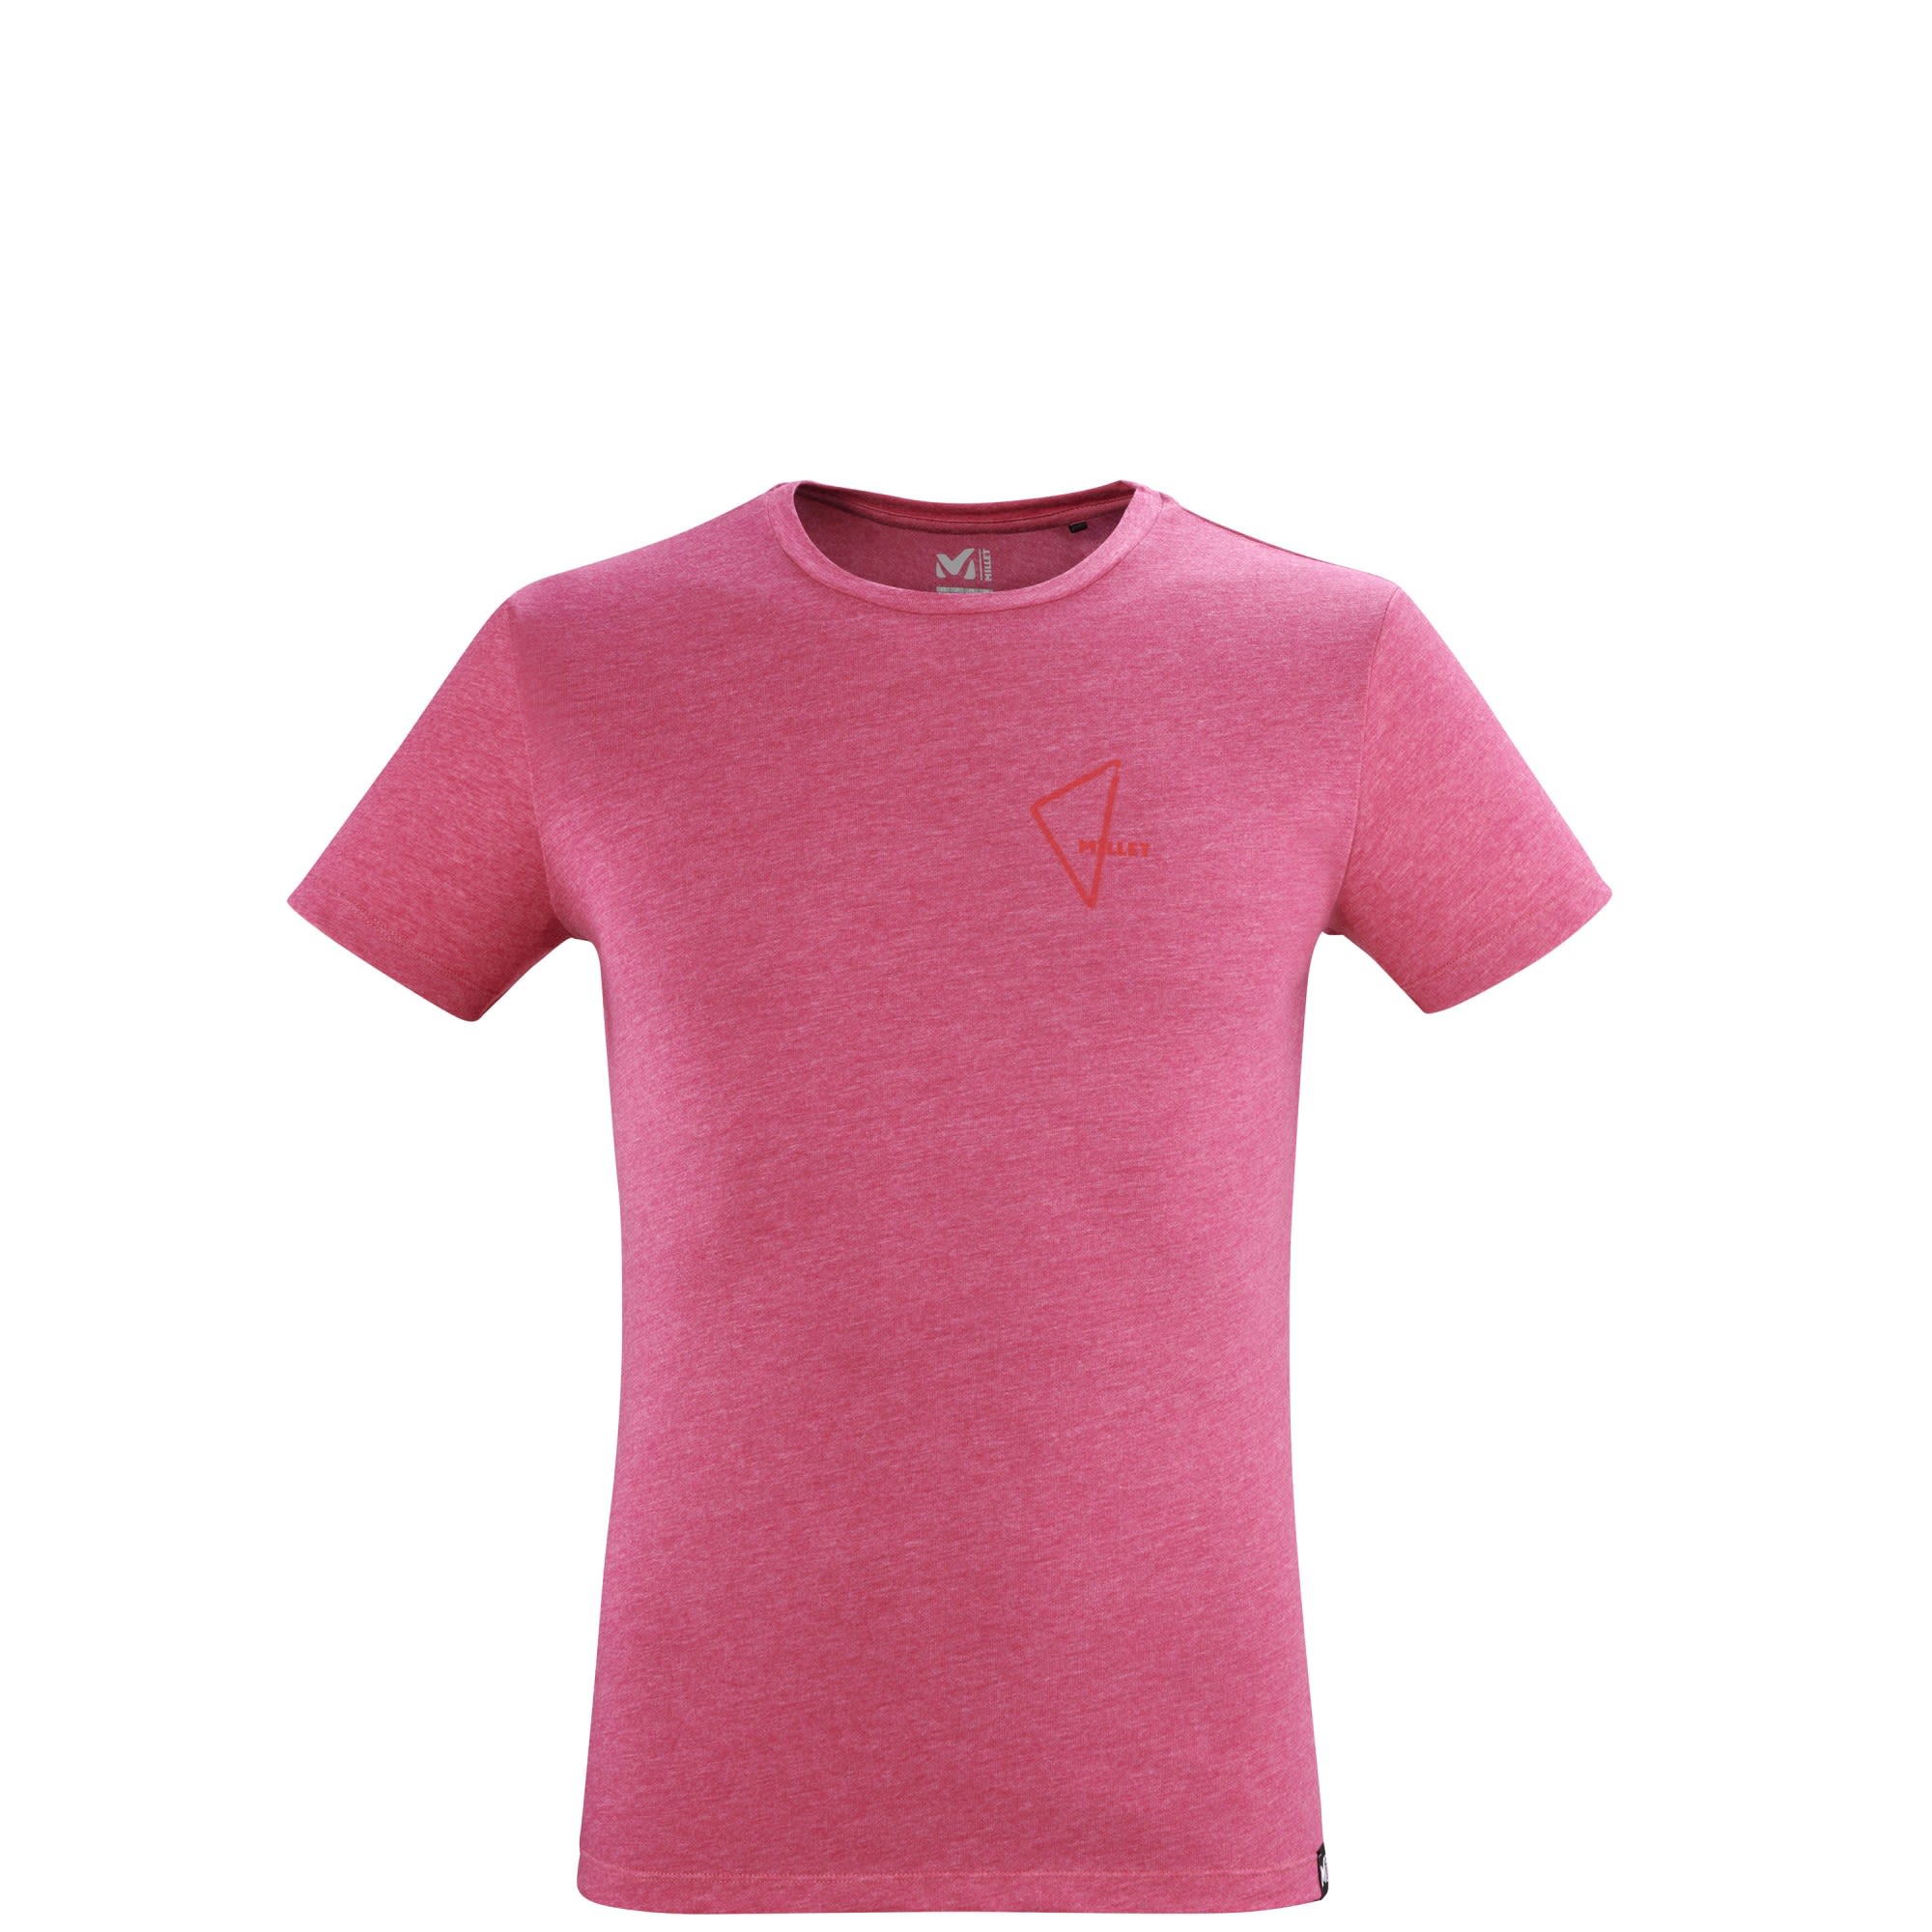 Millet Limited Colors TS Short-Sleeve Pink- Male Kurzarm-Shirts- Grsse L - Farbe Dragon